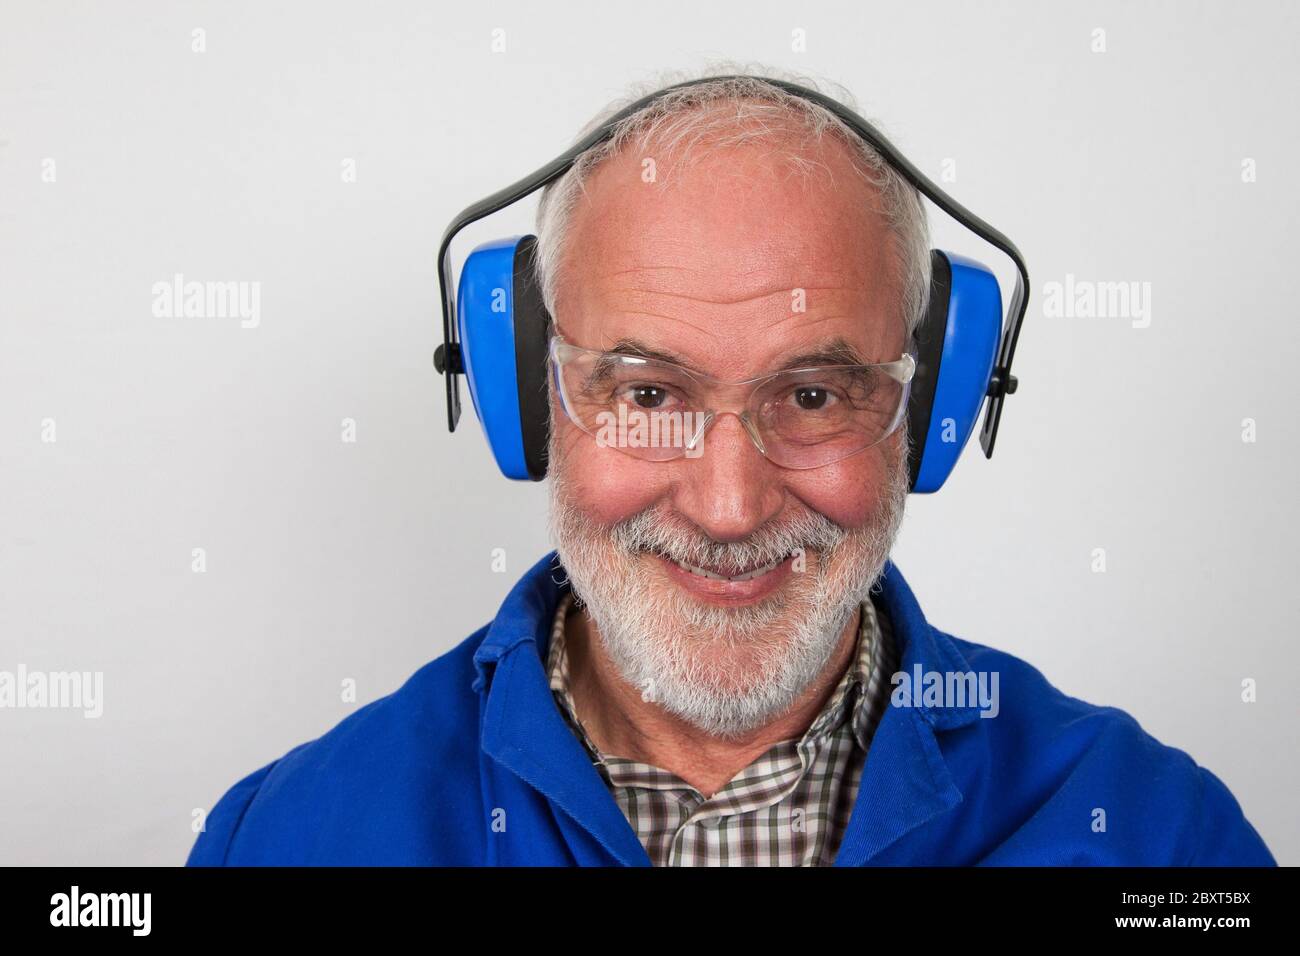 Old, experienced craftsman have a good laugh because they always play it safe and wear hearing protection and safety glasses. Stock Photo